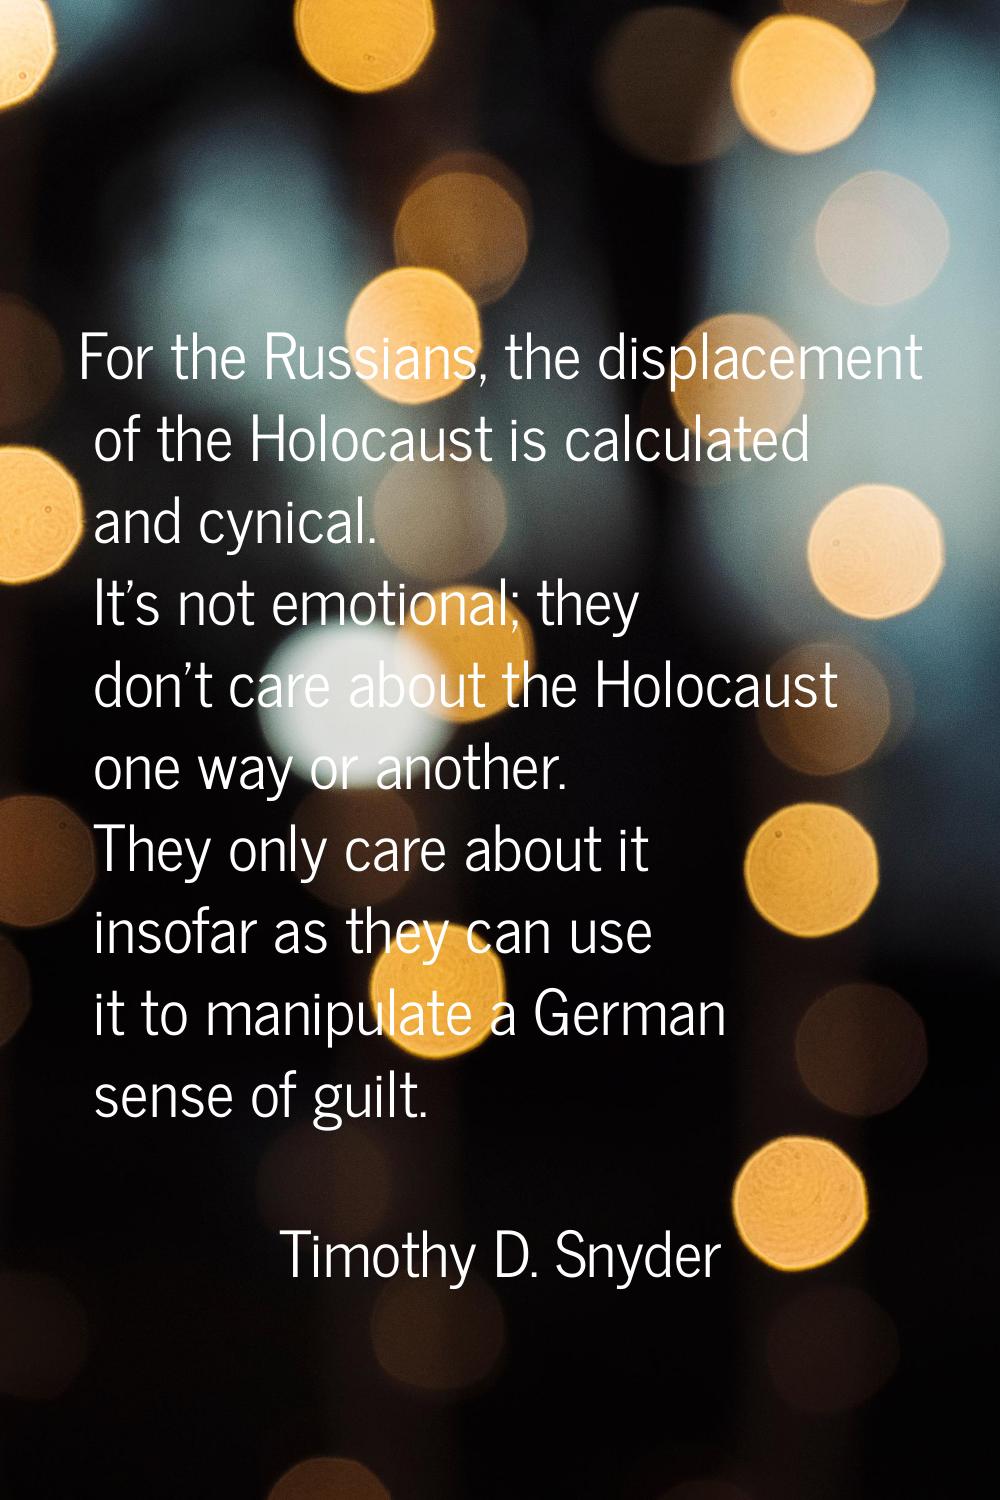 For the Russians, the displacement of the Holocaust is calculated and cynical. It's not emotional; 